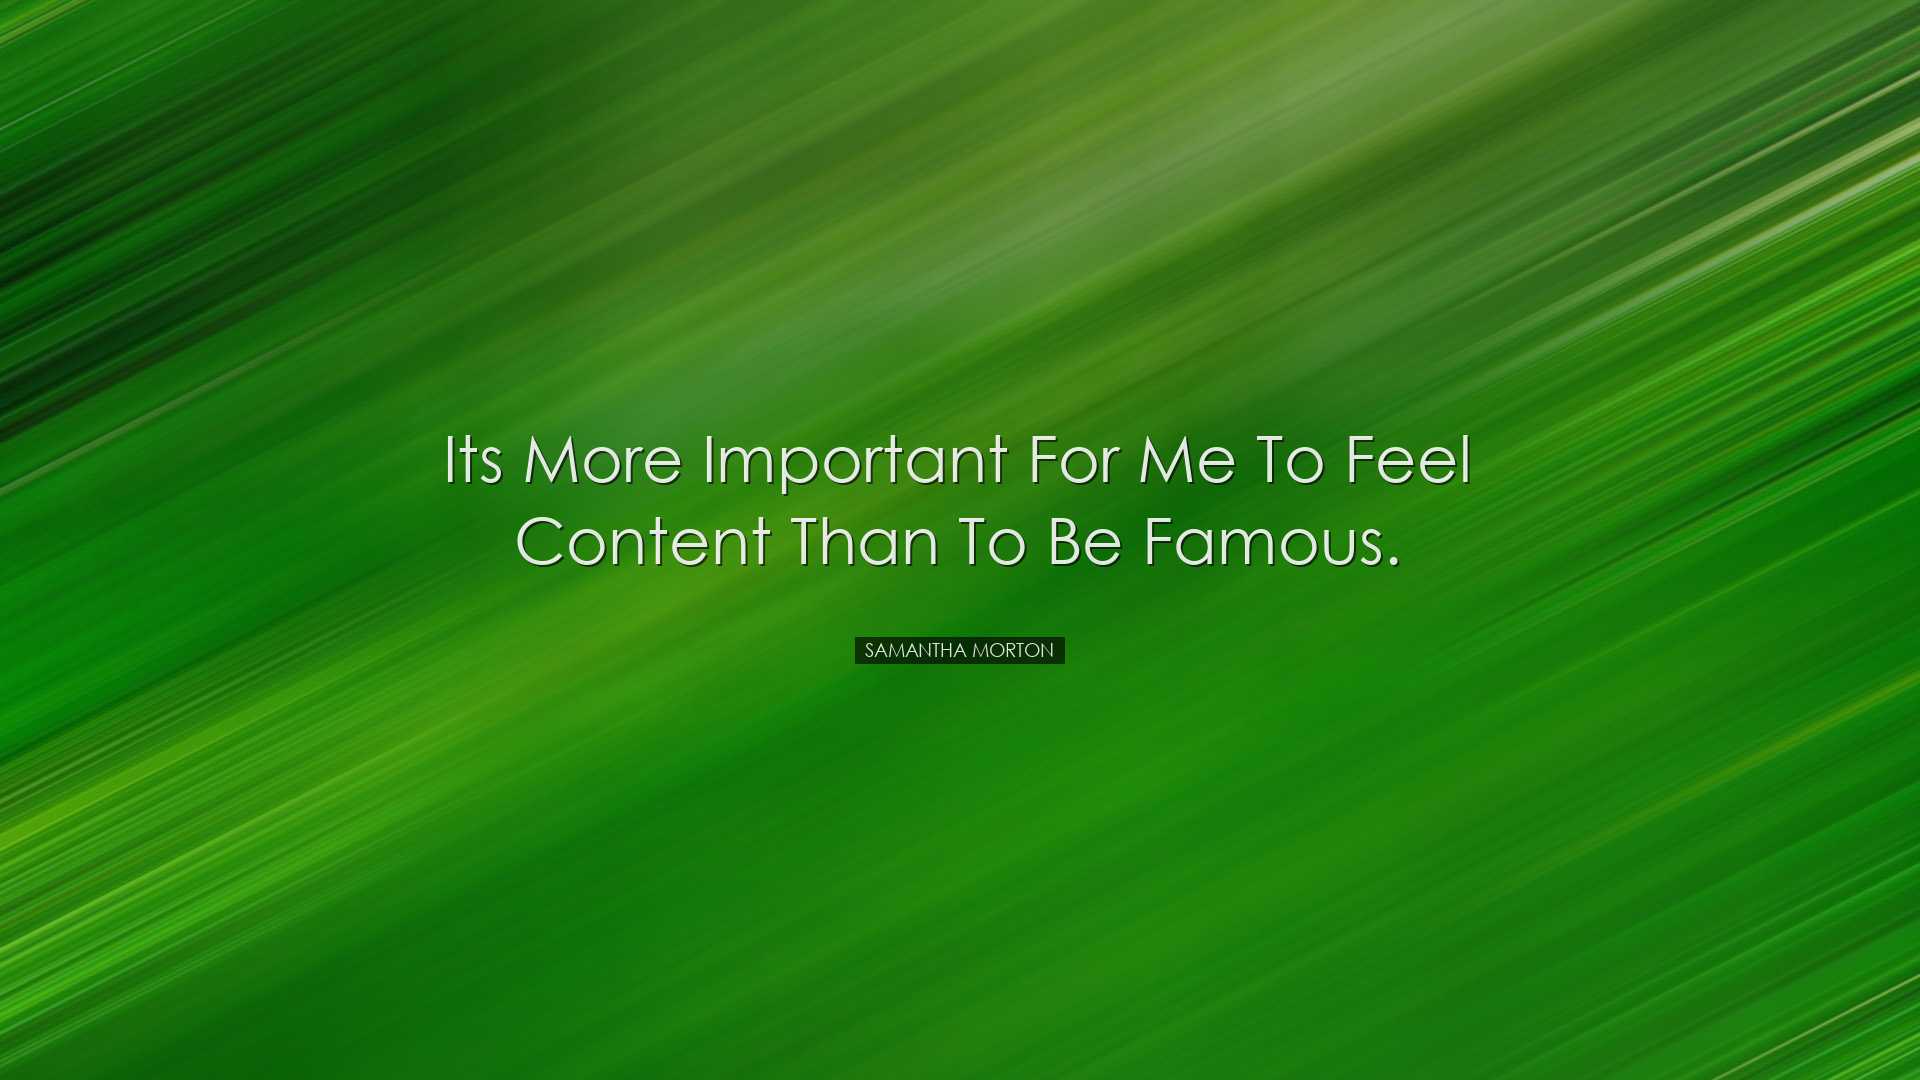 Its more important for me to feel content than to be famous. - Sam